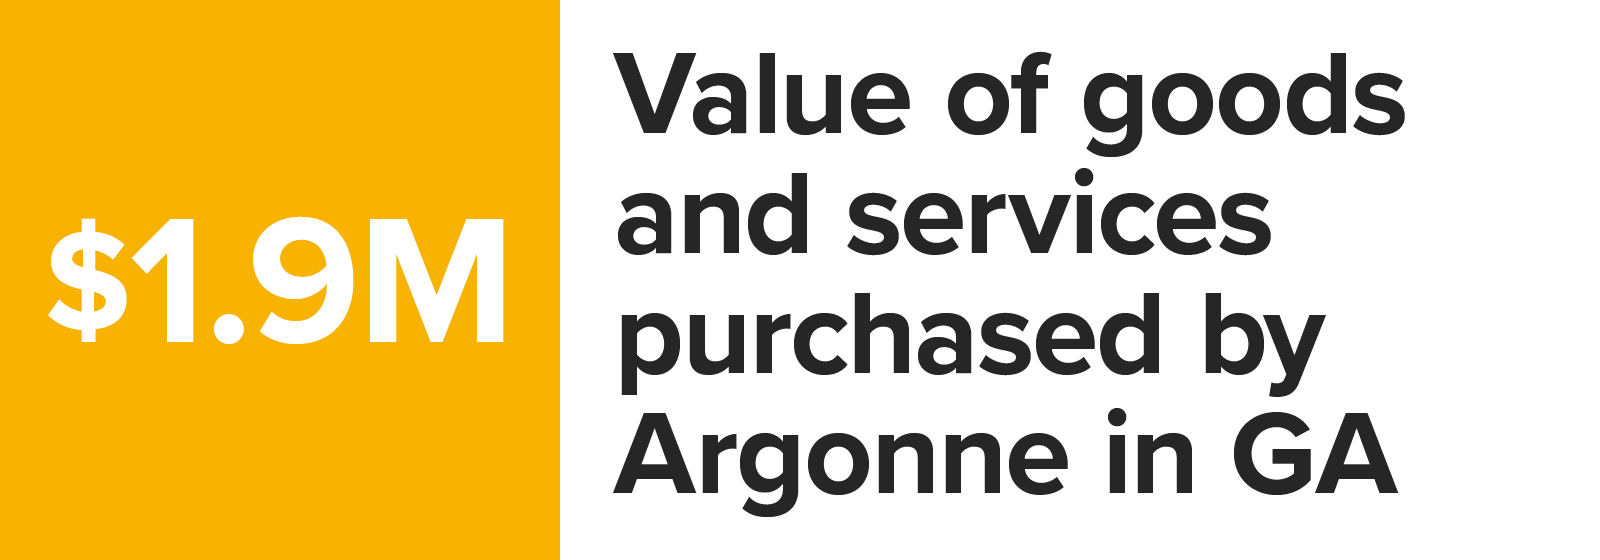 Number graphic value of goods and services purchased by Argonne in Georgia